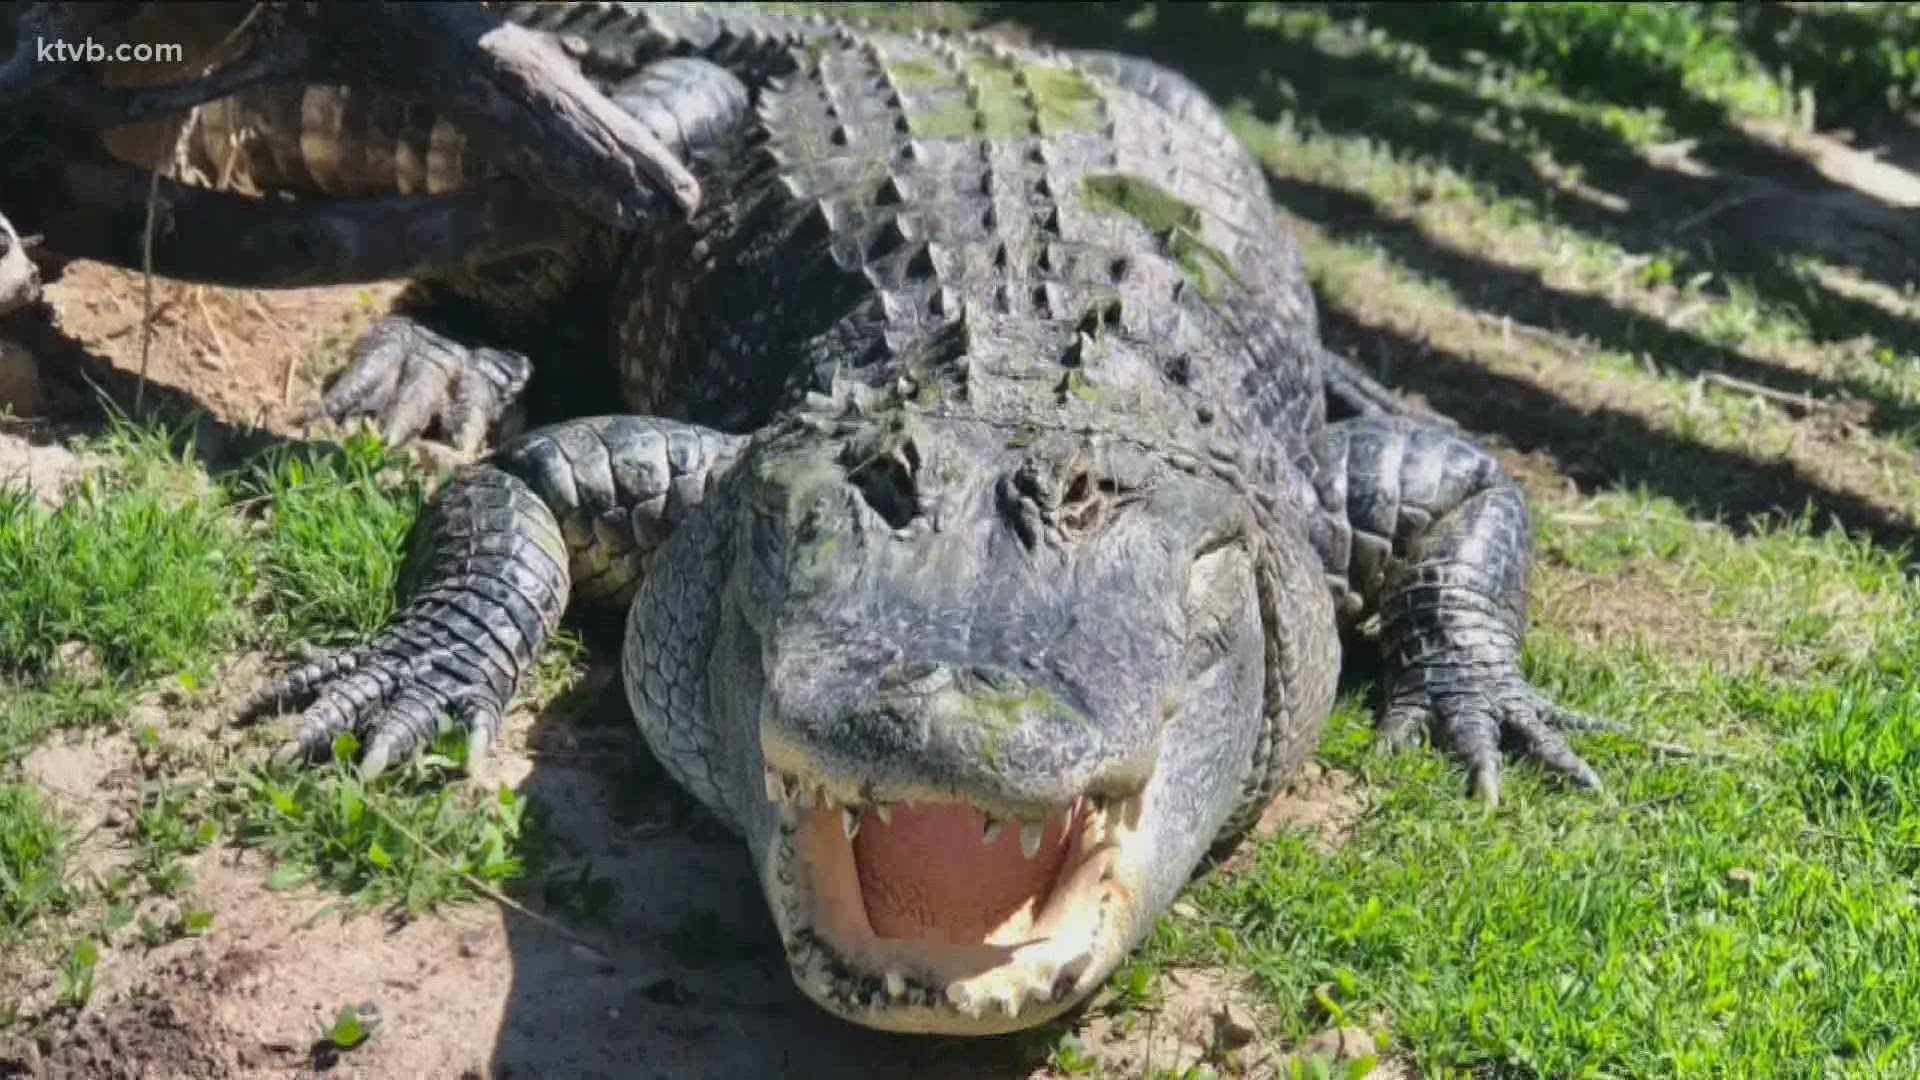 Corbin gives us an exclusive inside look at his latest project - a new home for his alligators.